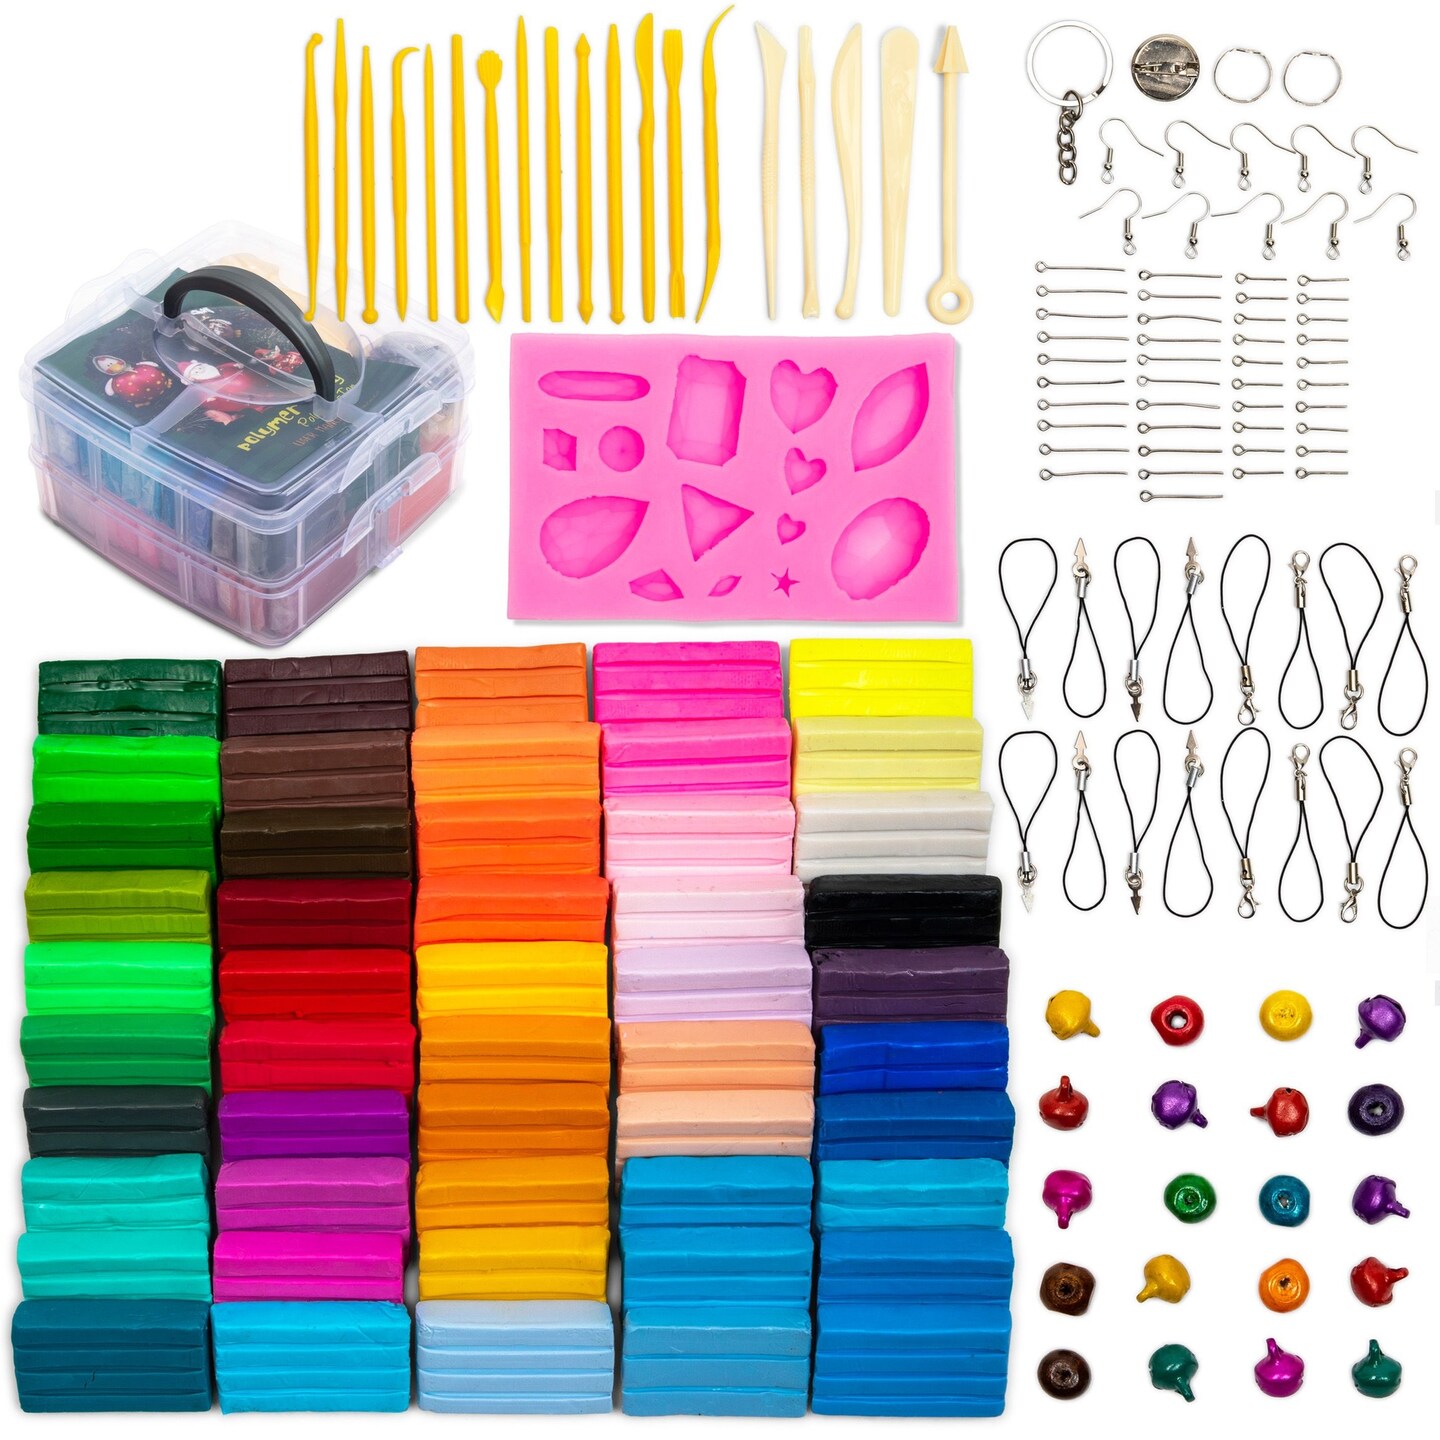 Polymer Clay 50 Color, Modeling Clay Kit DIY Oven Bake Clay with Sculpting  Tools, Accessories and Portable Storage Box, for Kids/Adults/Beginners